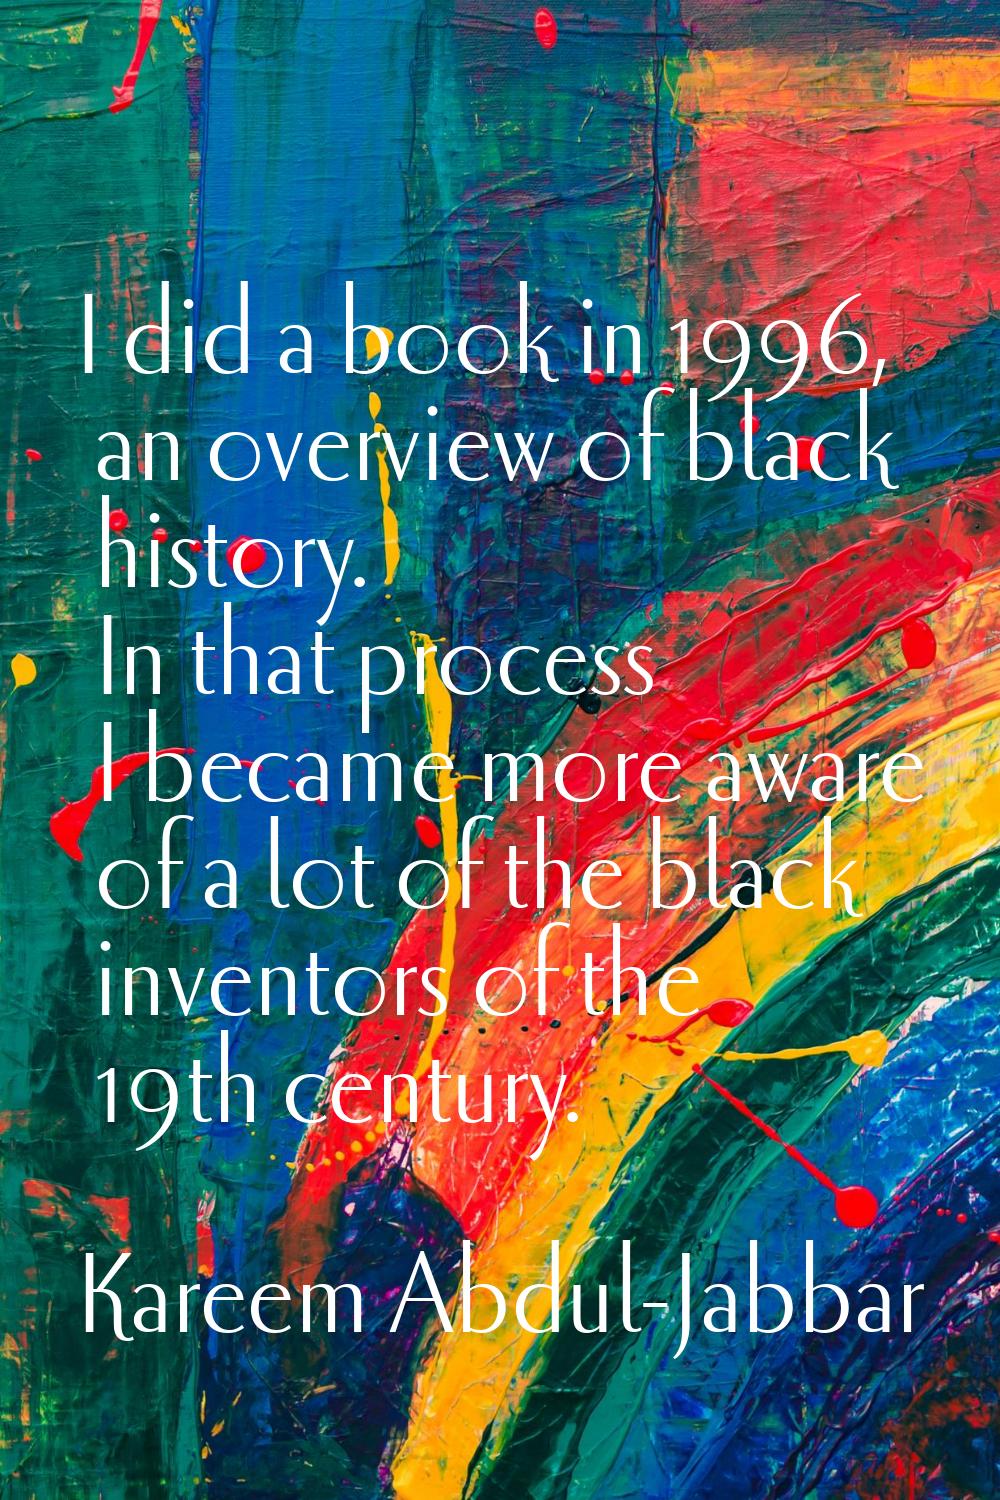 I did a book in 1996, an overview of black history. In that process I became more aware of a lot of